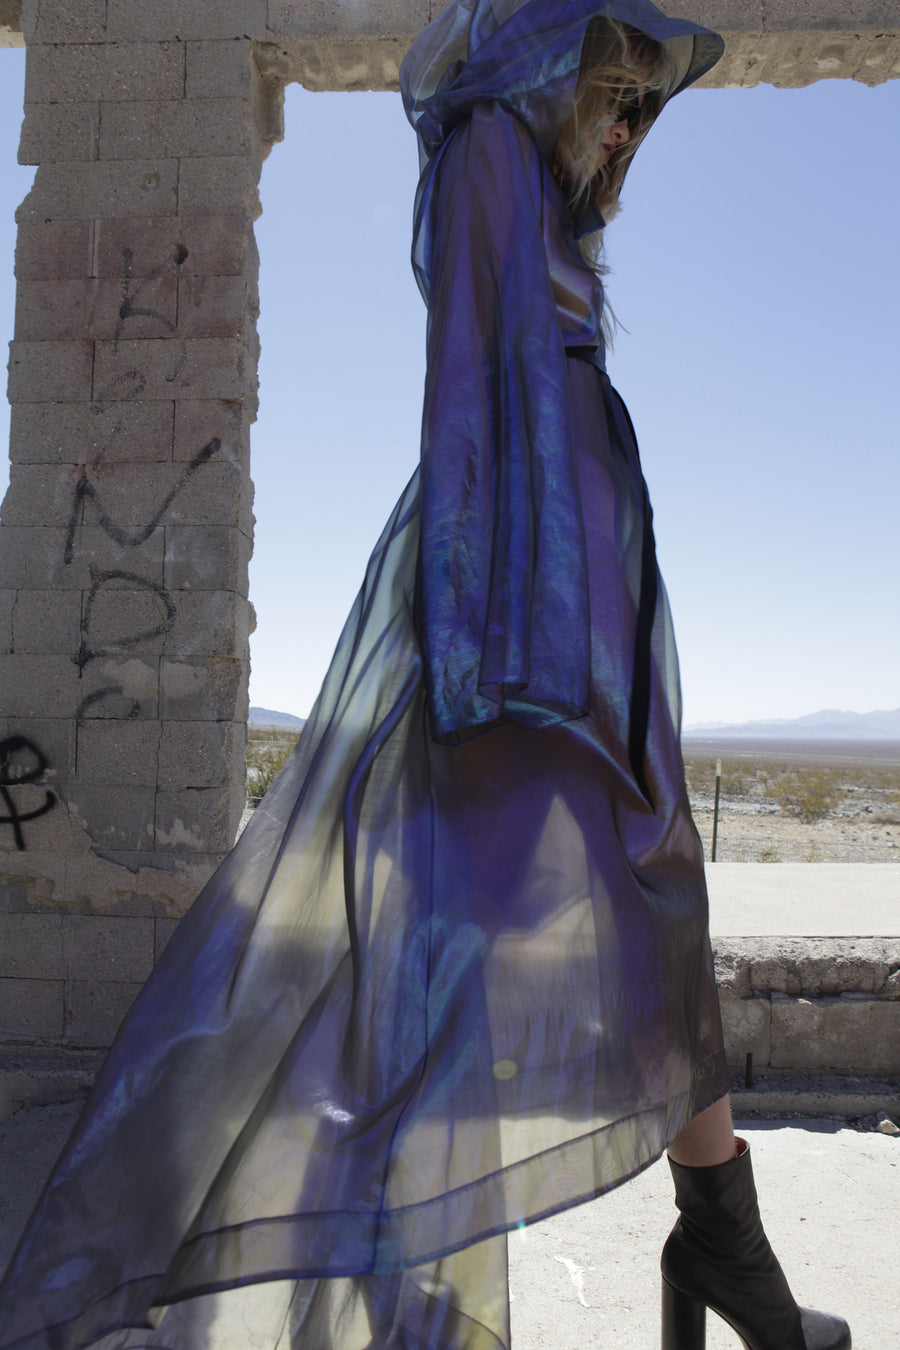 Maggie Laine IMG model Wendy Nichol New York Clothing Designer Handmade in NYC New York City SS17 Fashion Runway Show Signals to the Mothership Made to Order Custom Tailoring Made to Measure Death Valley Hooded Psychedelic Coat Sheer Transparent Silk Holographic Purple Blue Silver Belle Sleeve Hood Cape Jacket Cloak Long Train Witch Wizard Alien UFO Total Drone 